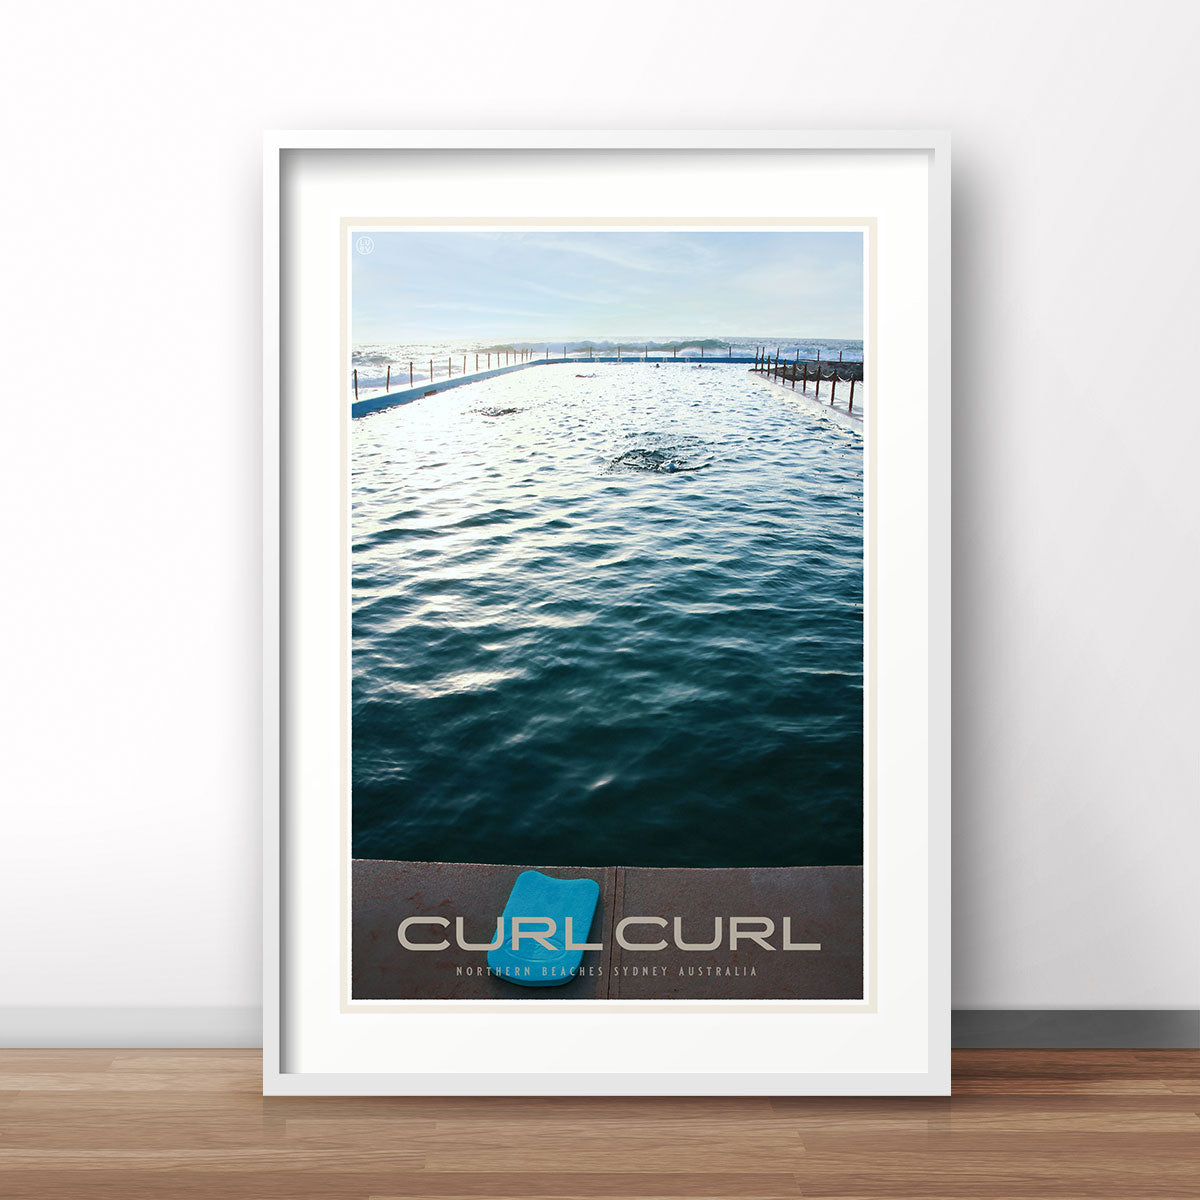 Curl curl pool retro vintage travel poster print from places we luv